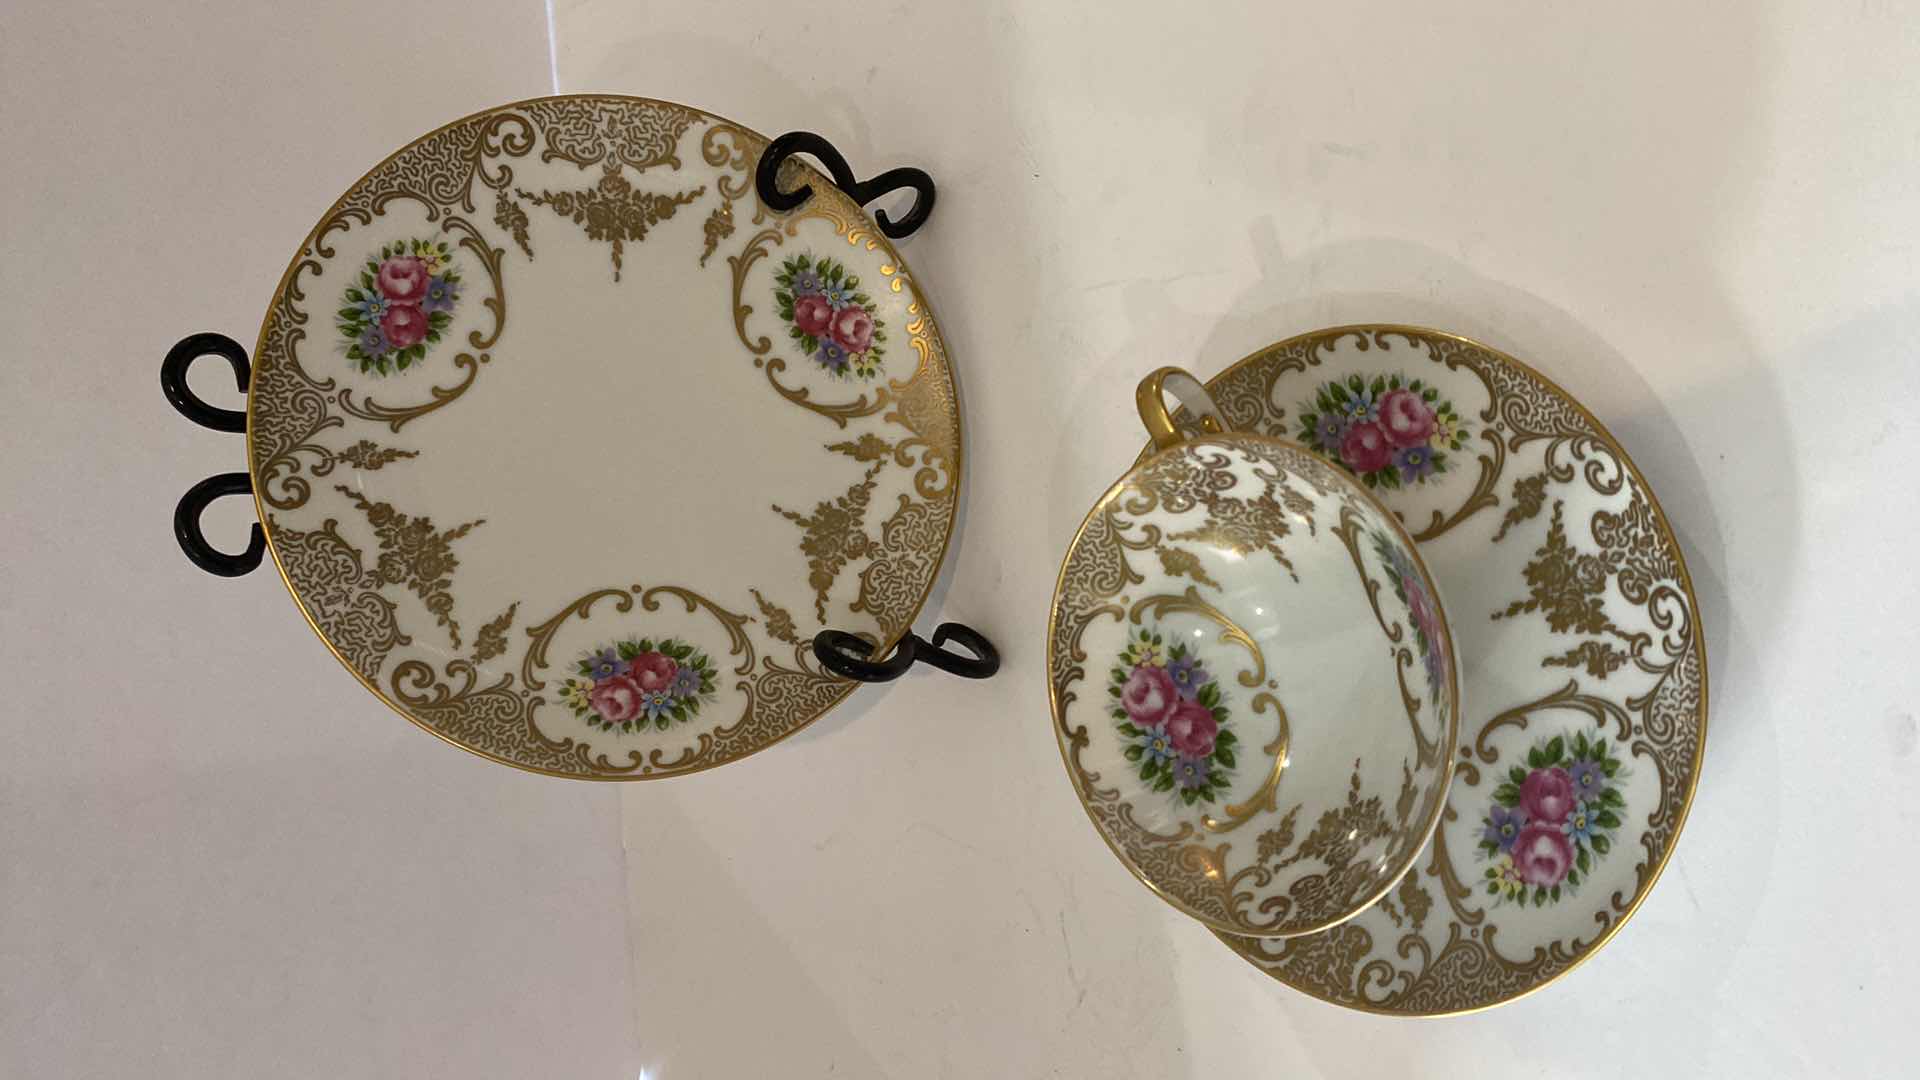 Photo 2 of ALBOTH & KAISER BAVARIA 3 PIECE TEA CUP, SAUCER AND PLATE SET WITH GOLD EDGE